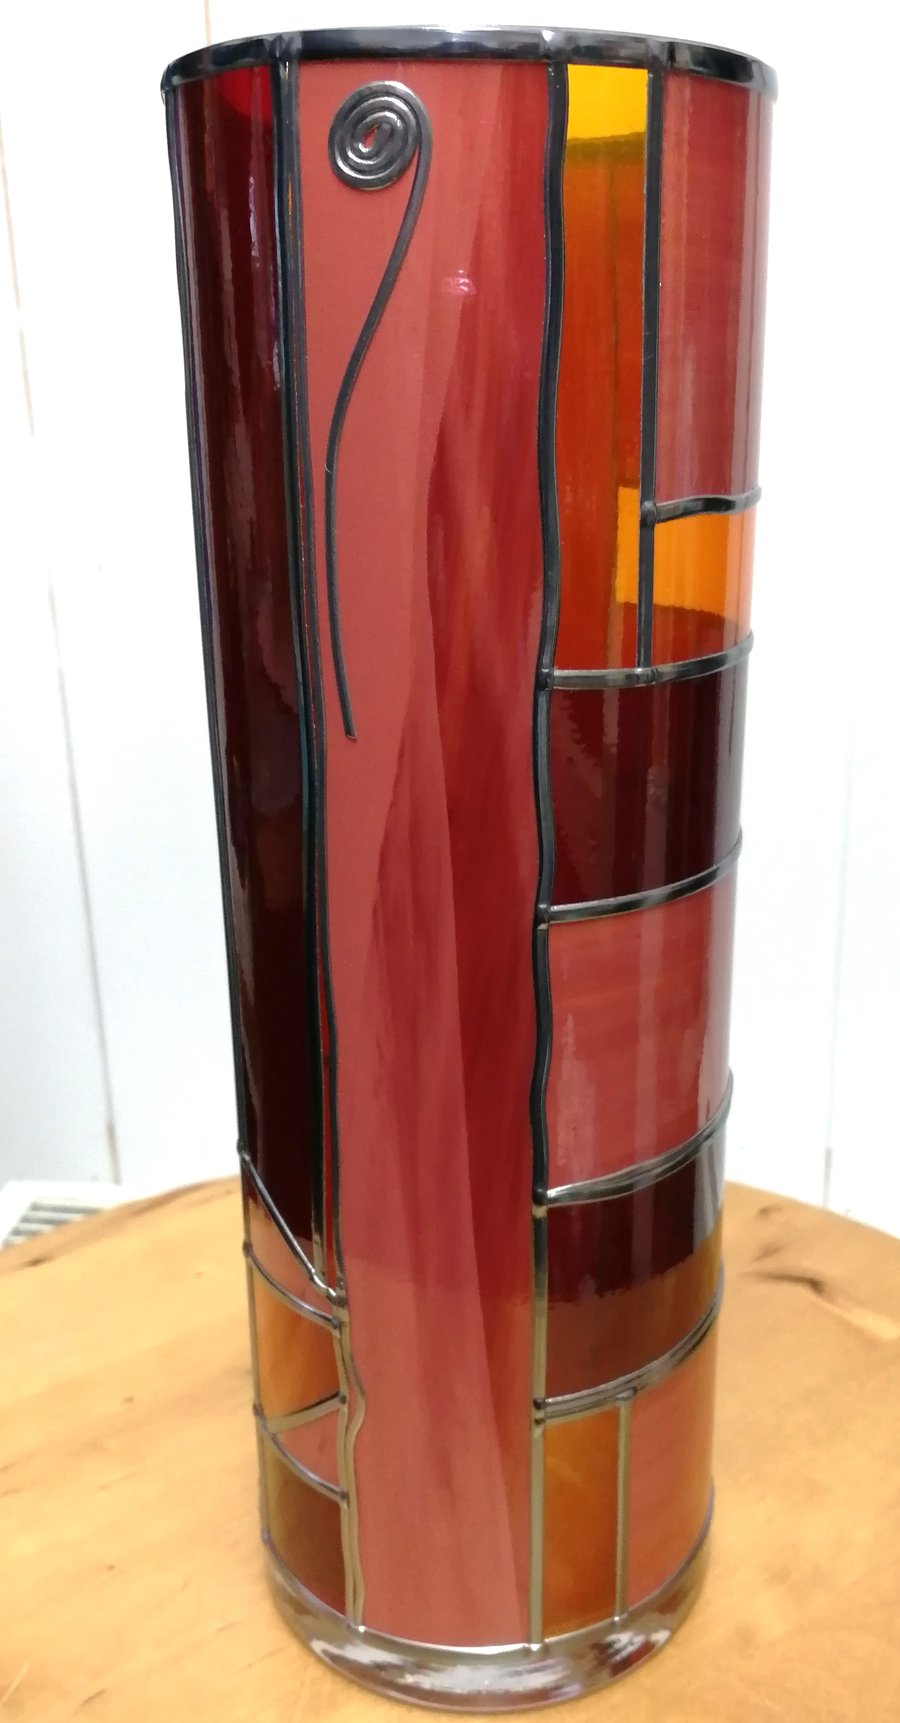 Fire Fly is a 30cm Tall STaine Glass Effect Flower Vase